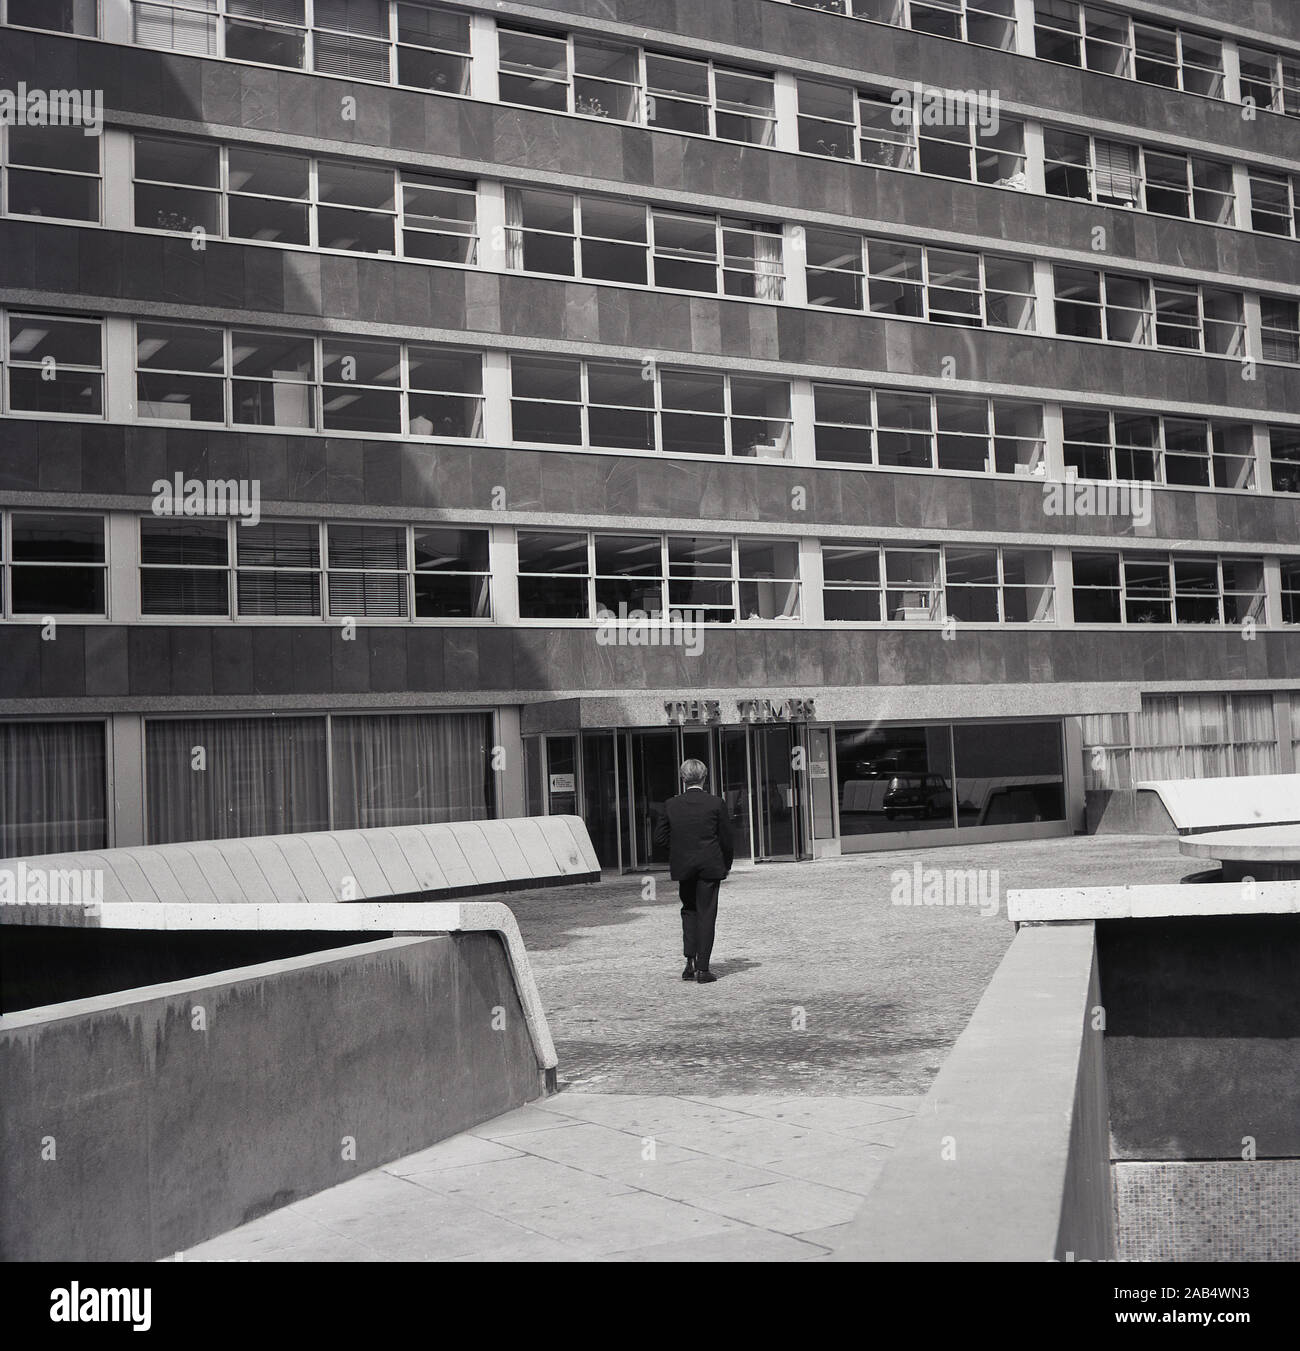 1960s, historcial, man on a concourse walking towards a modern concrete constructed office building of the era, home of the British daily newspaper, 'The Times', London, England, UK. Stock Photo